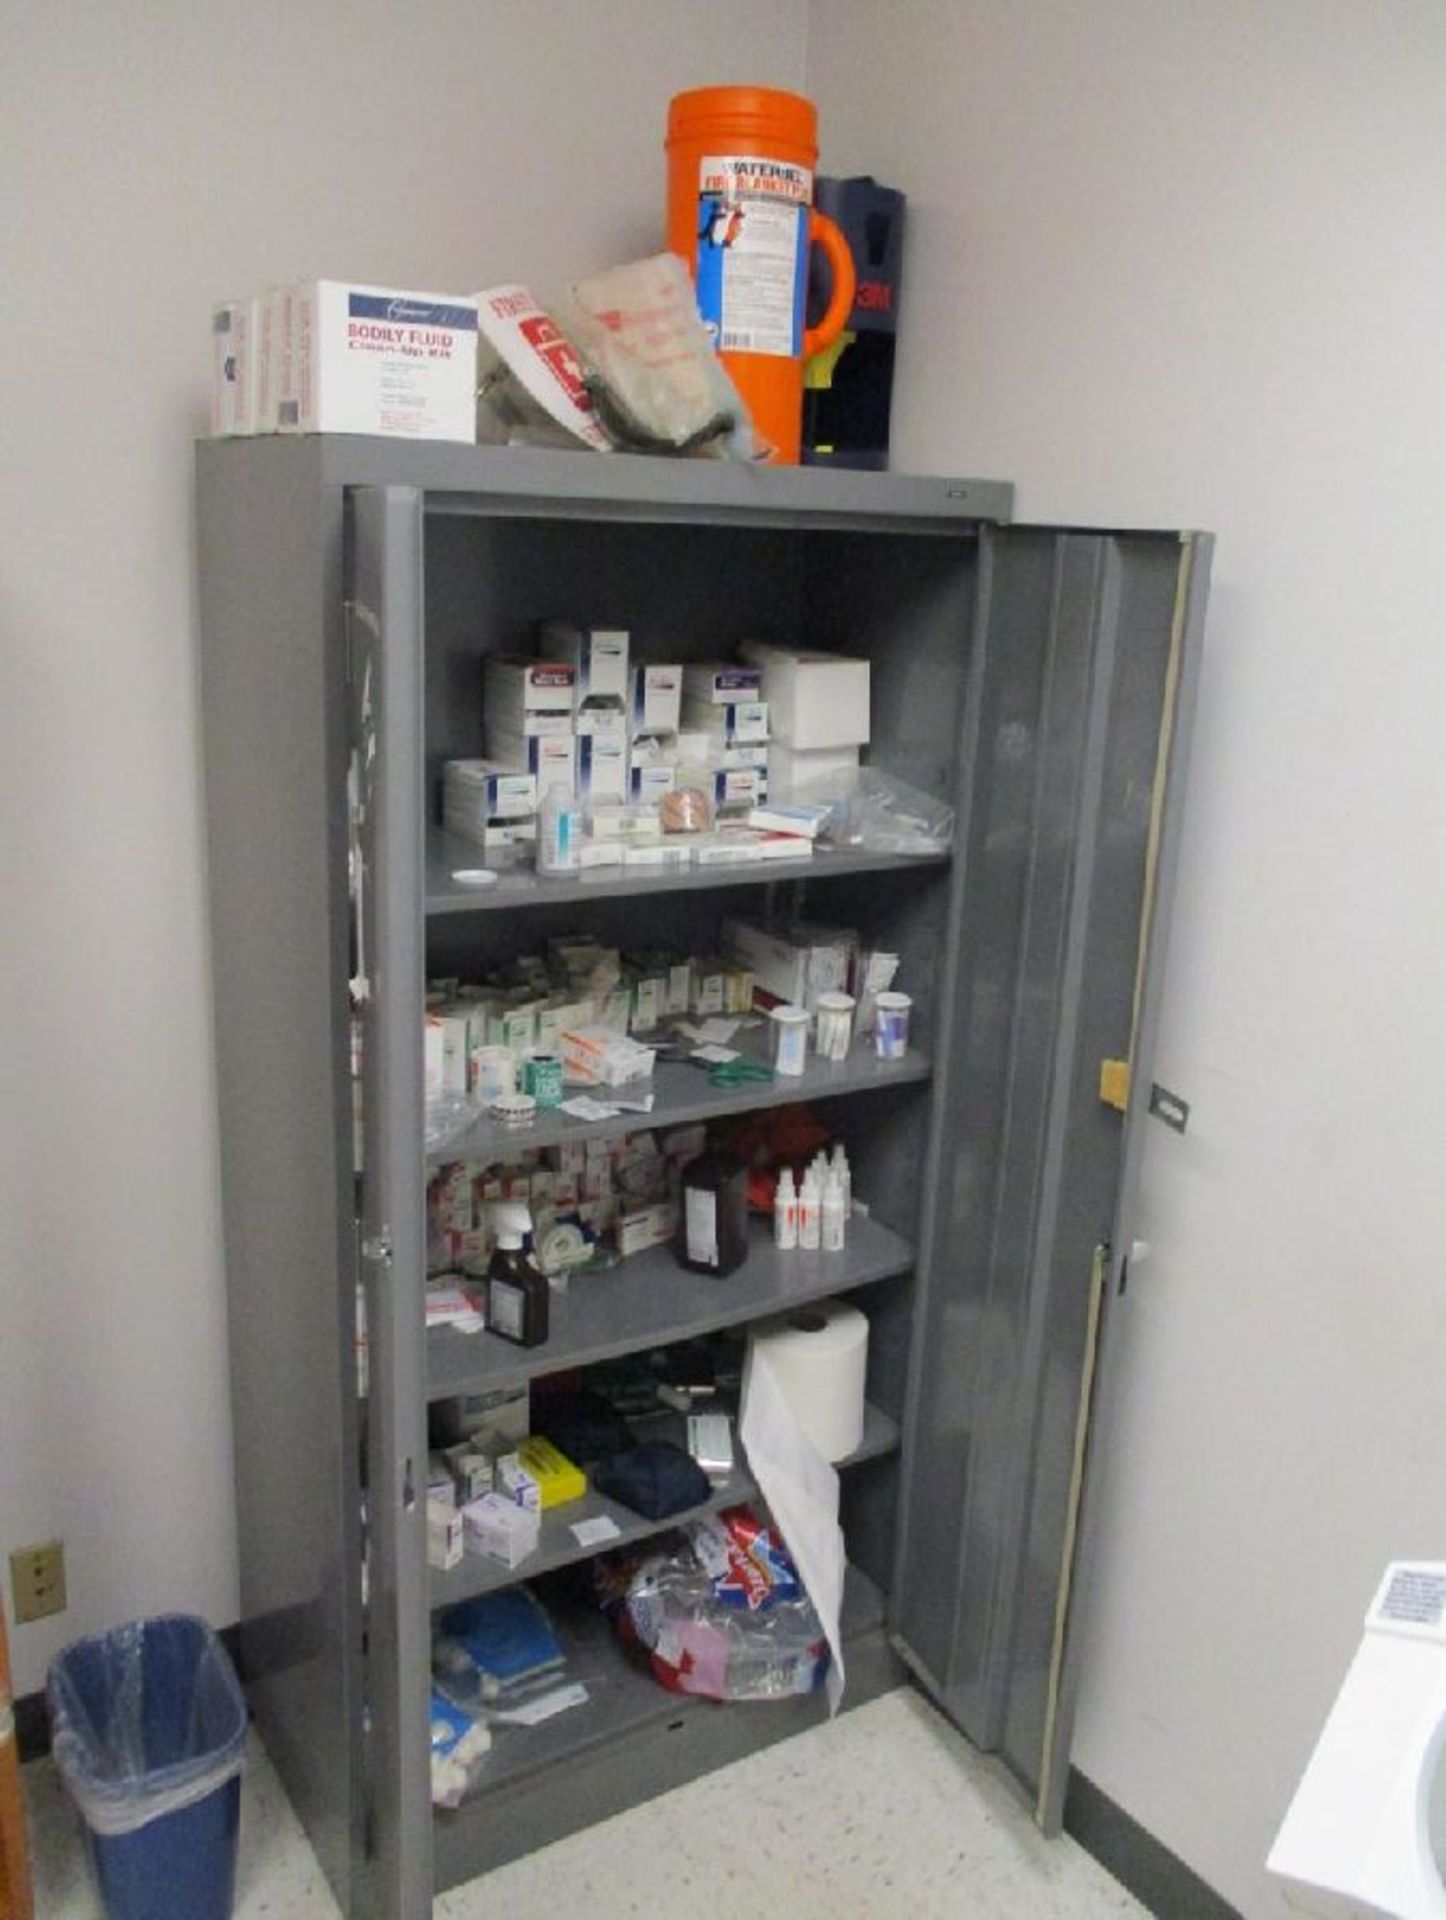 Contents of Medical Equipment Room - Image 15 of 22